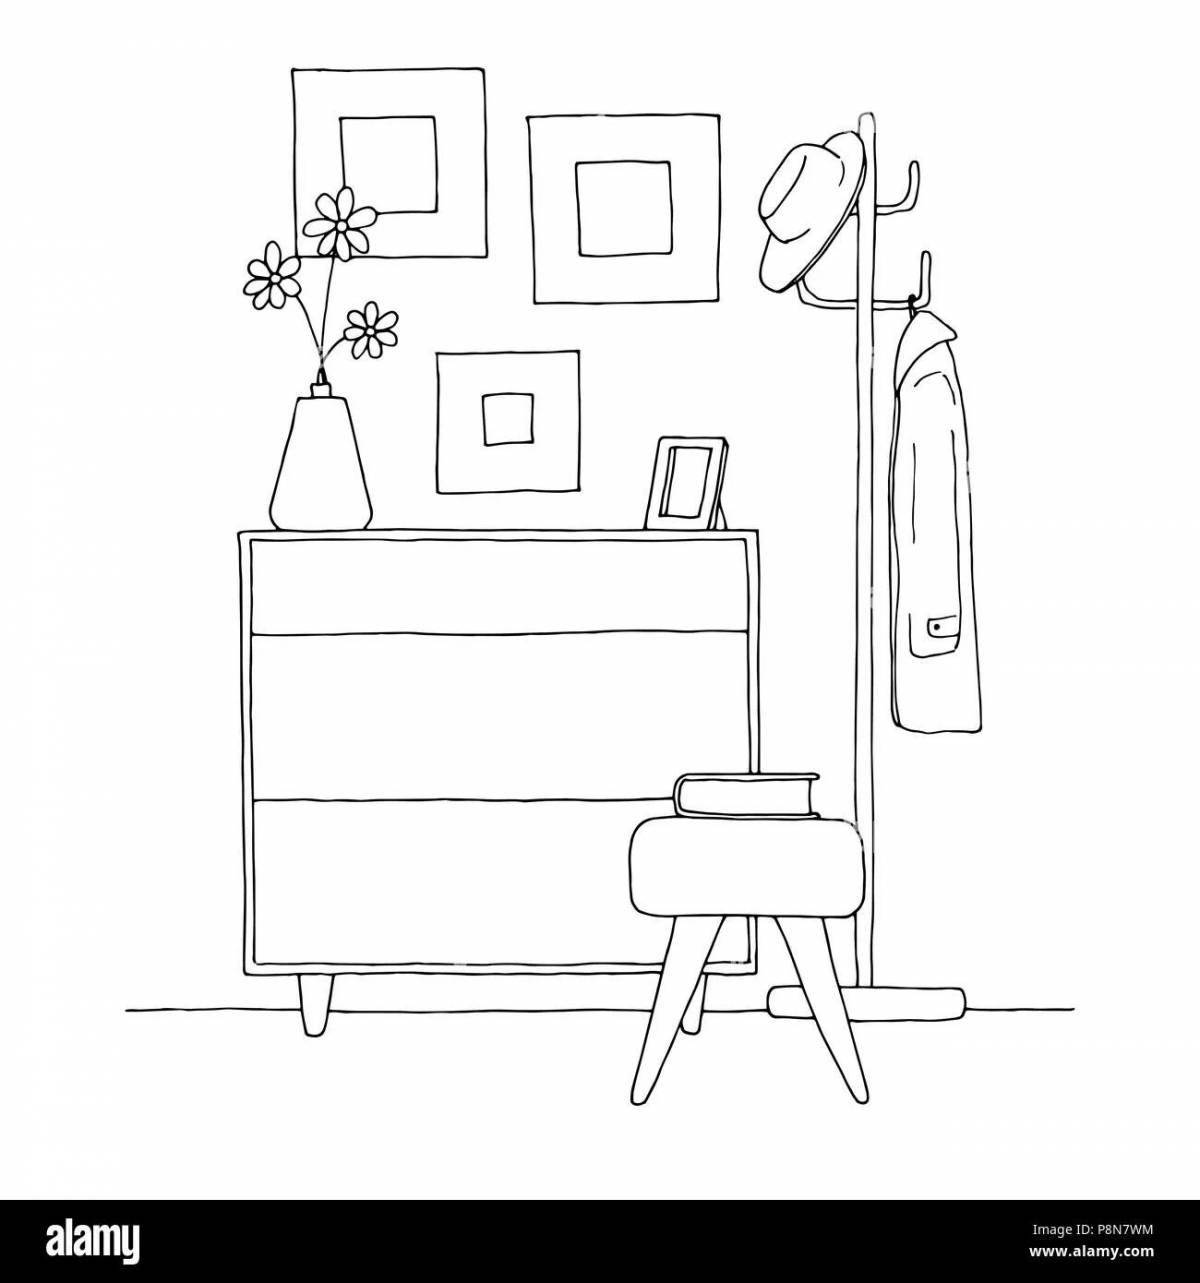 Playful hallway coloring page